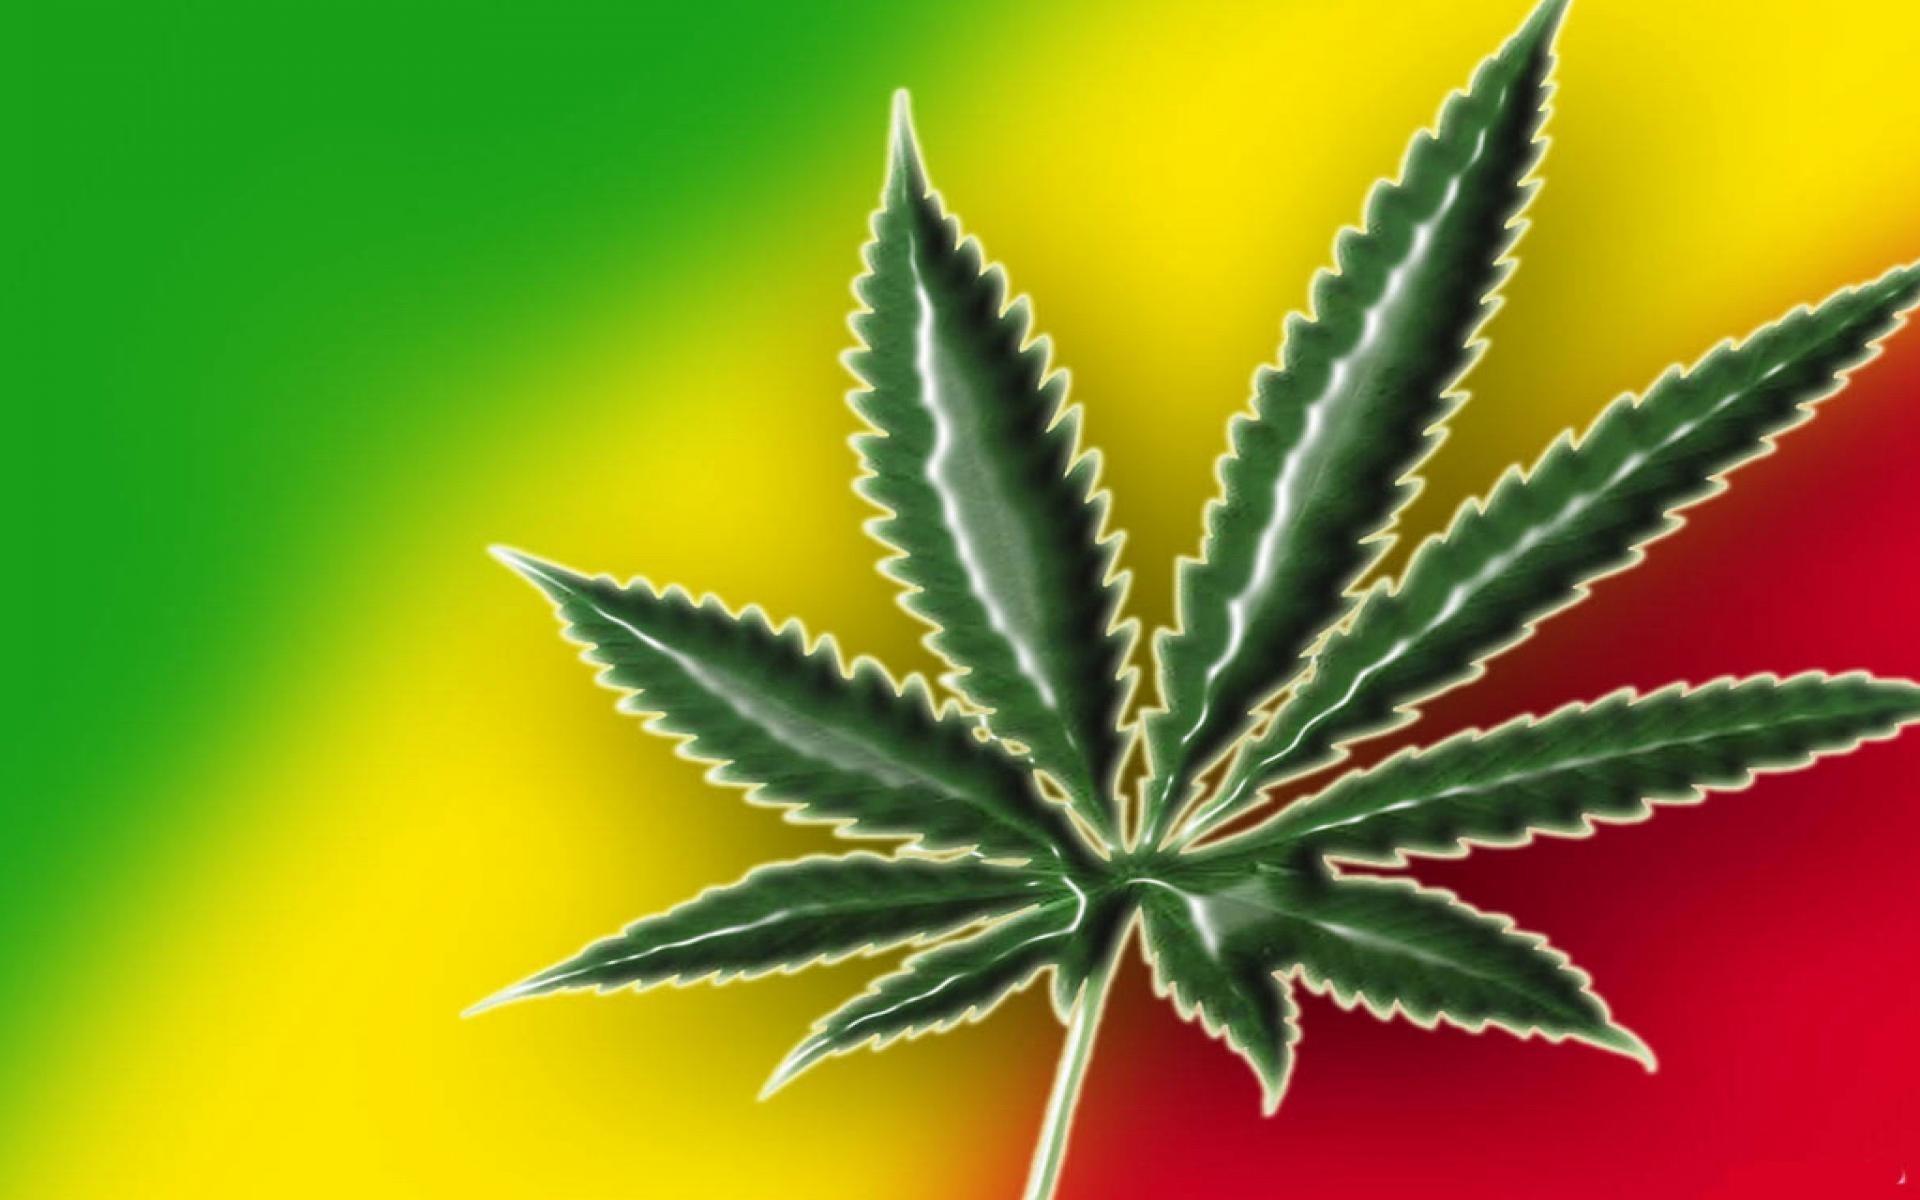 Trippy Rasta Weed Wallpaper background picture